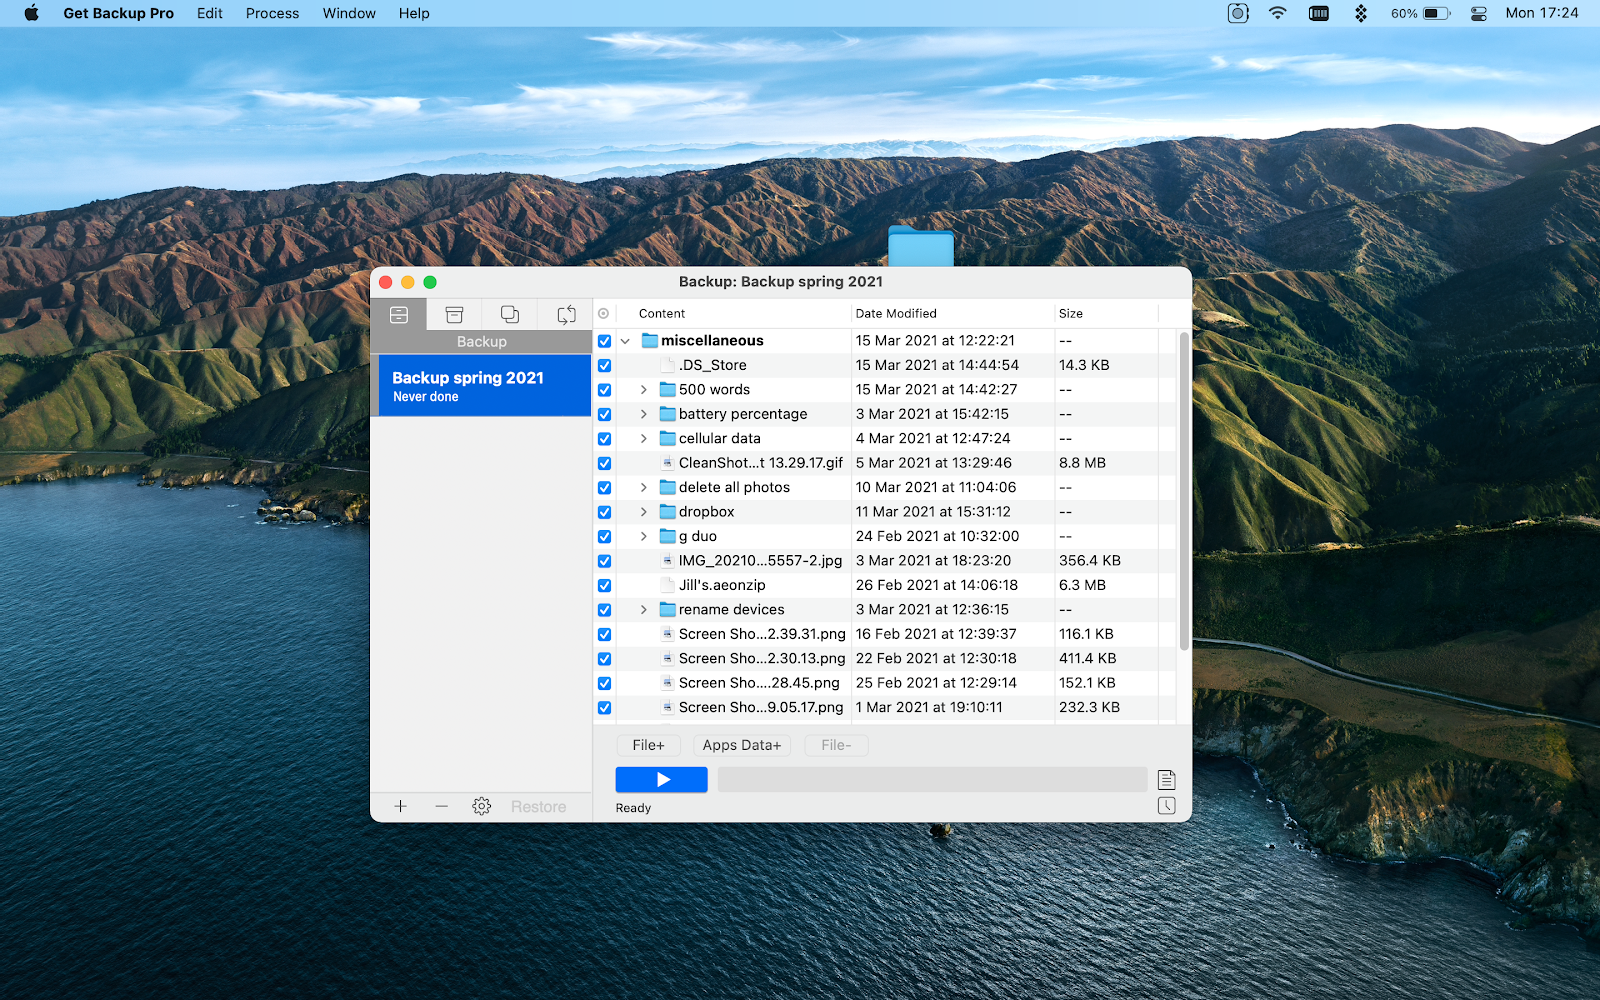 get-backup-pro-view-on-mac